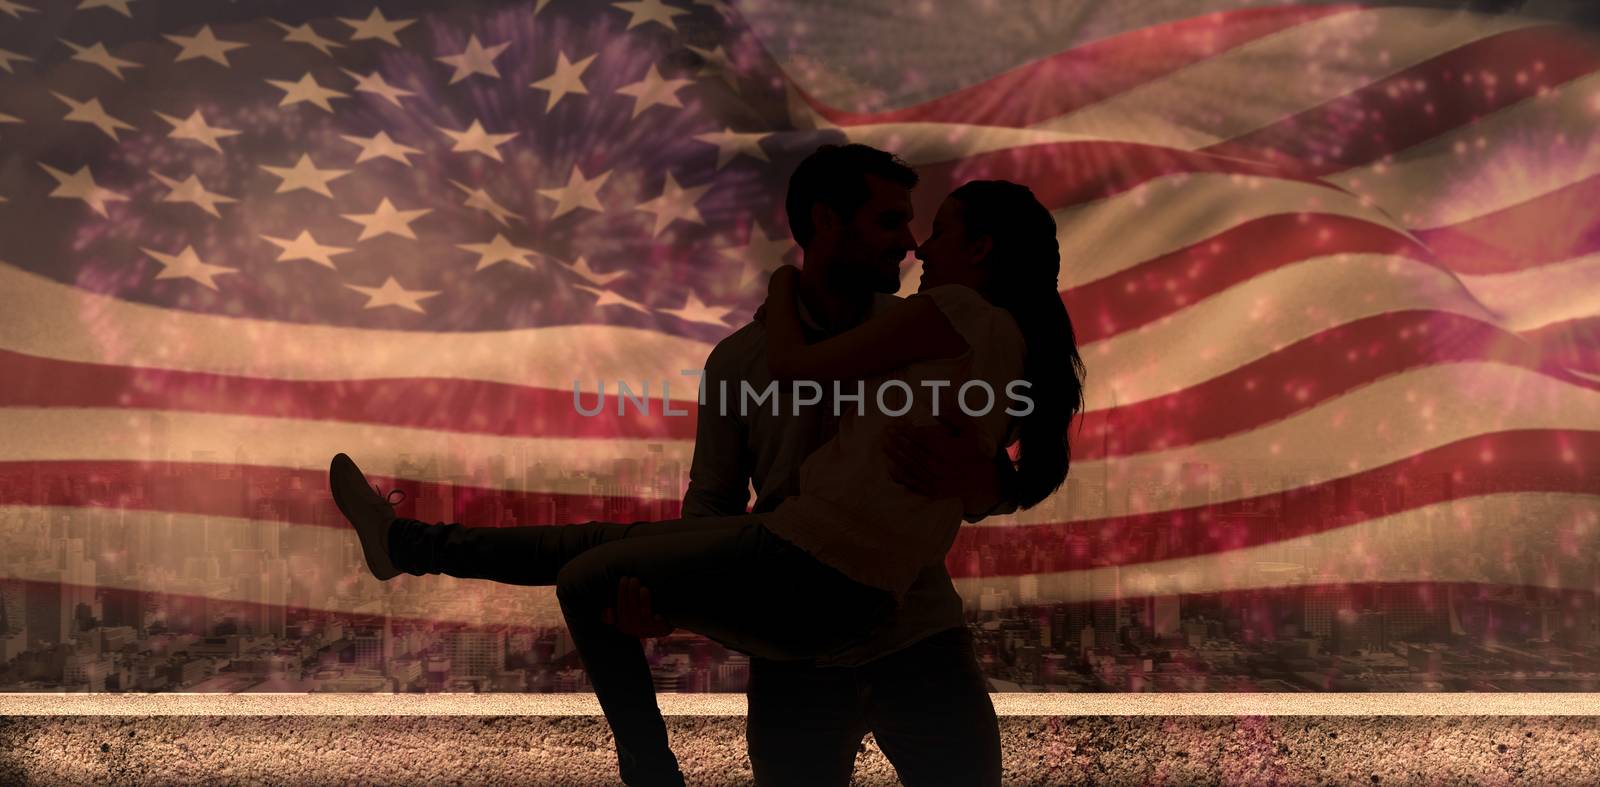 Composite image of attractive young couple having fun by Wavebreakmedia